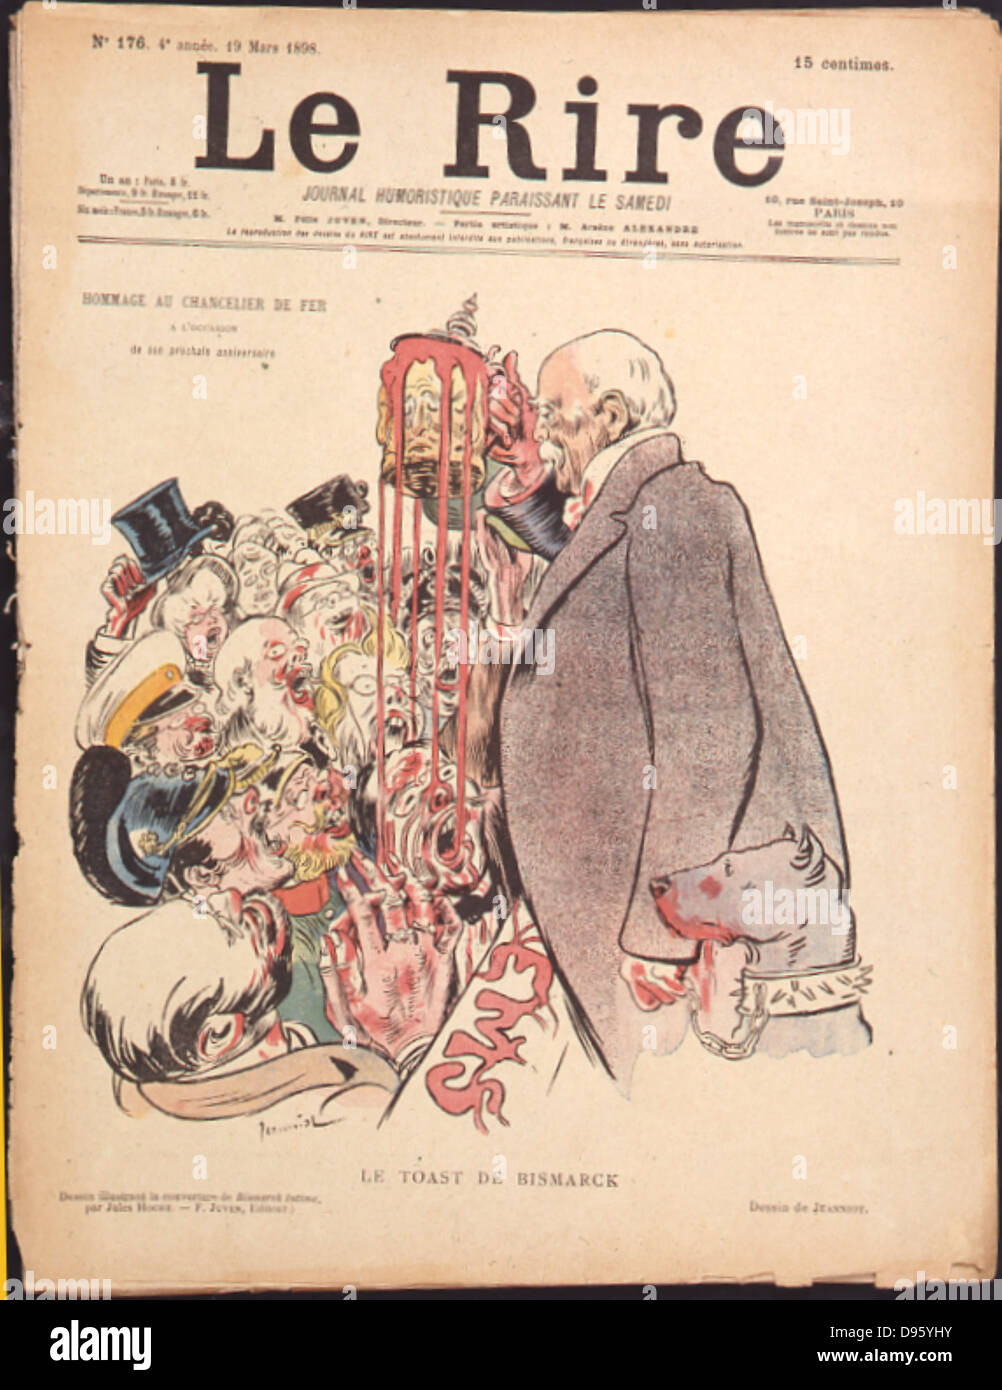 Cartoon from 'Le Rire', Paris, 19 March 1898 dedicated to Otto von Bismarck (1815-1898) German statesman, known as the Iron Chancellor, on his forthcoming birthday on 1 April.  Bismarck died on 30 July 1898. Stock Photo